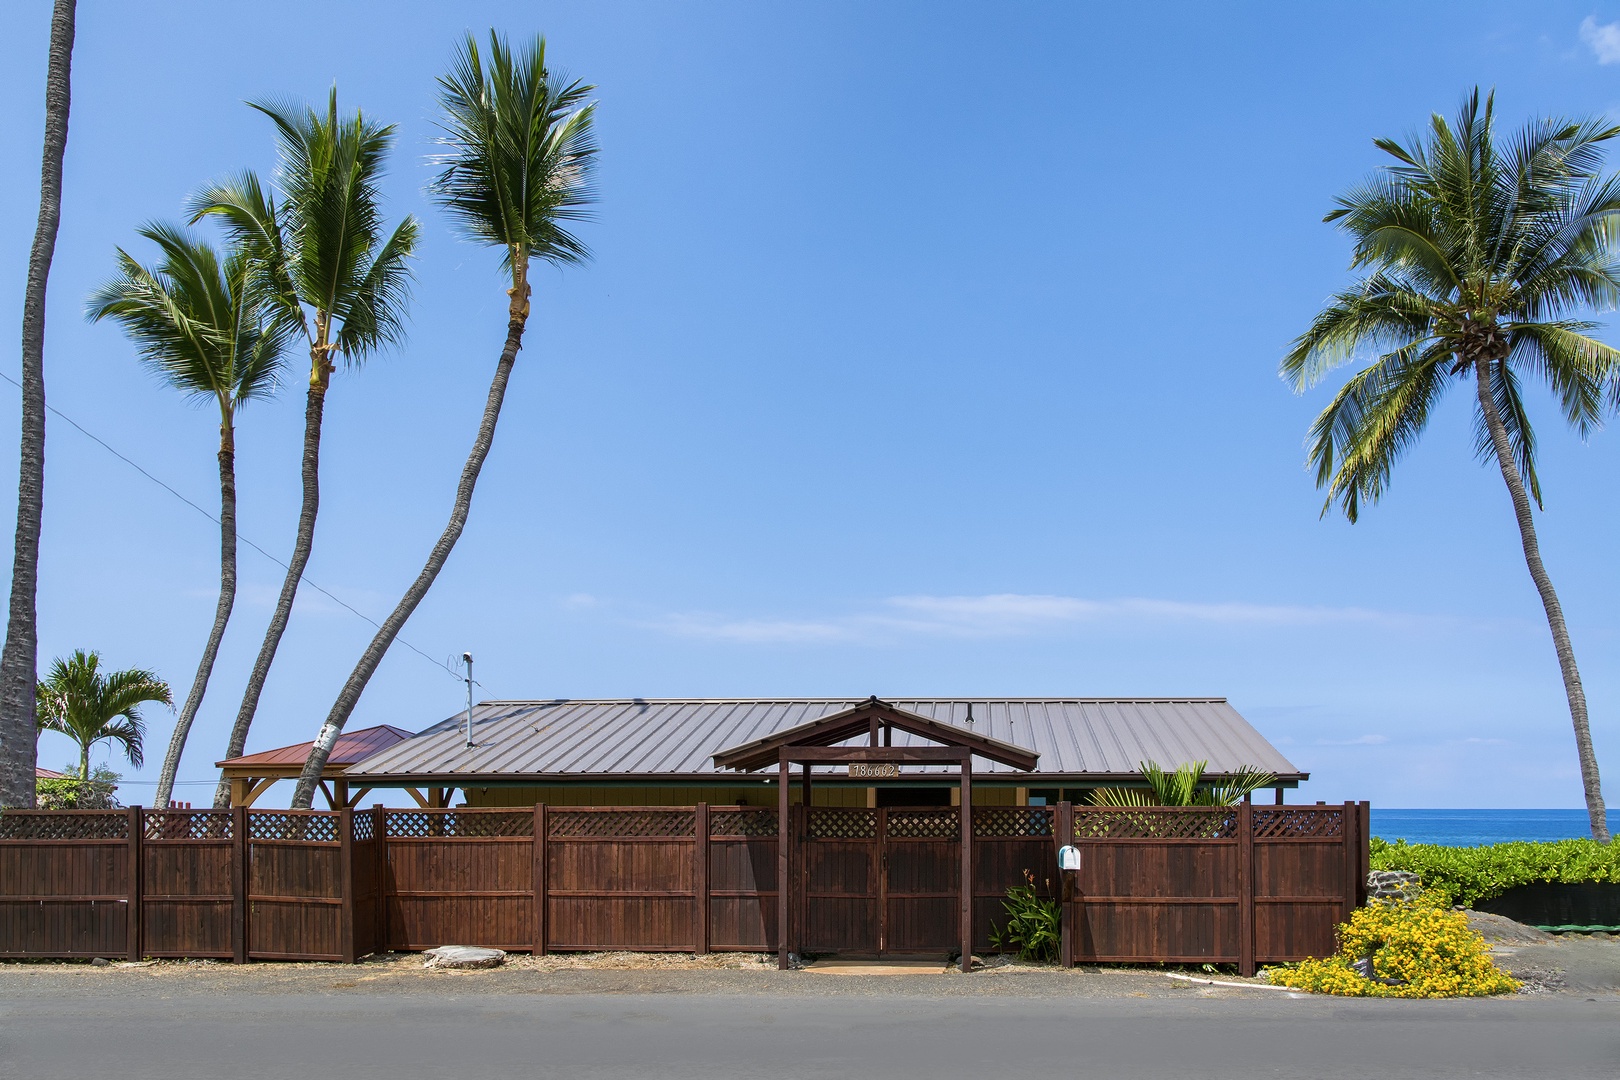 Kailua Kona Vacation Rentals, The Cottage - Across the street looking towards the house which is fenced all the way around.